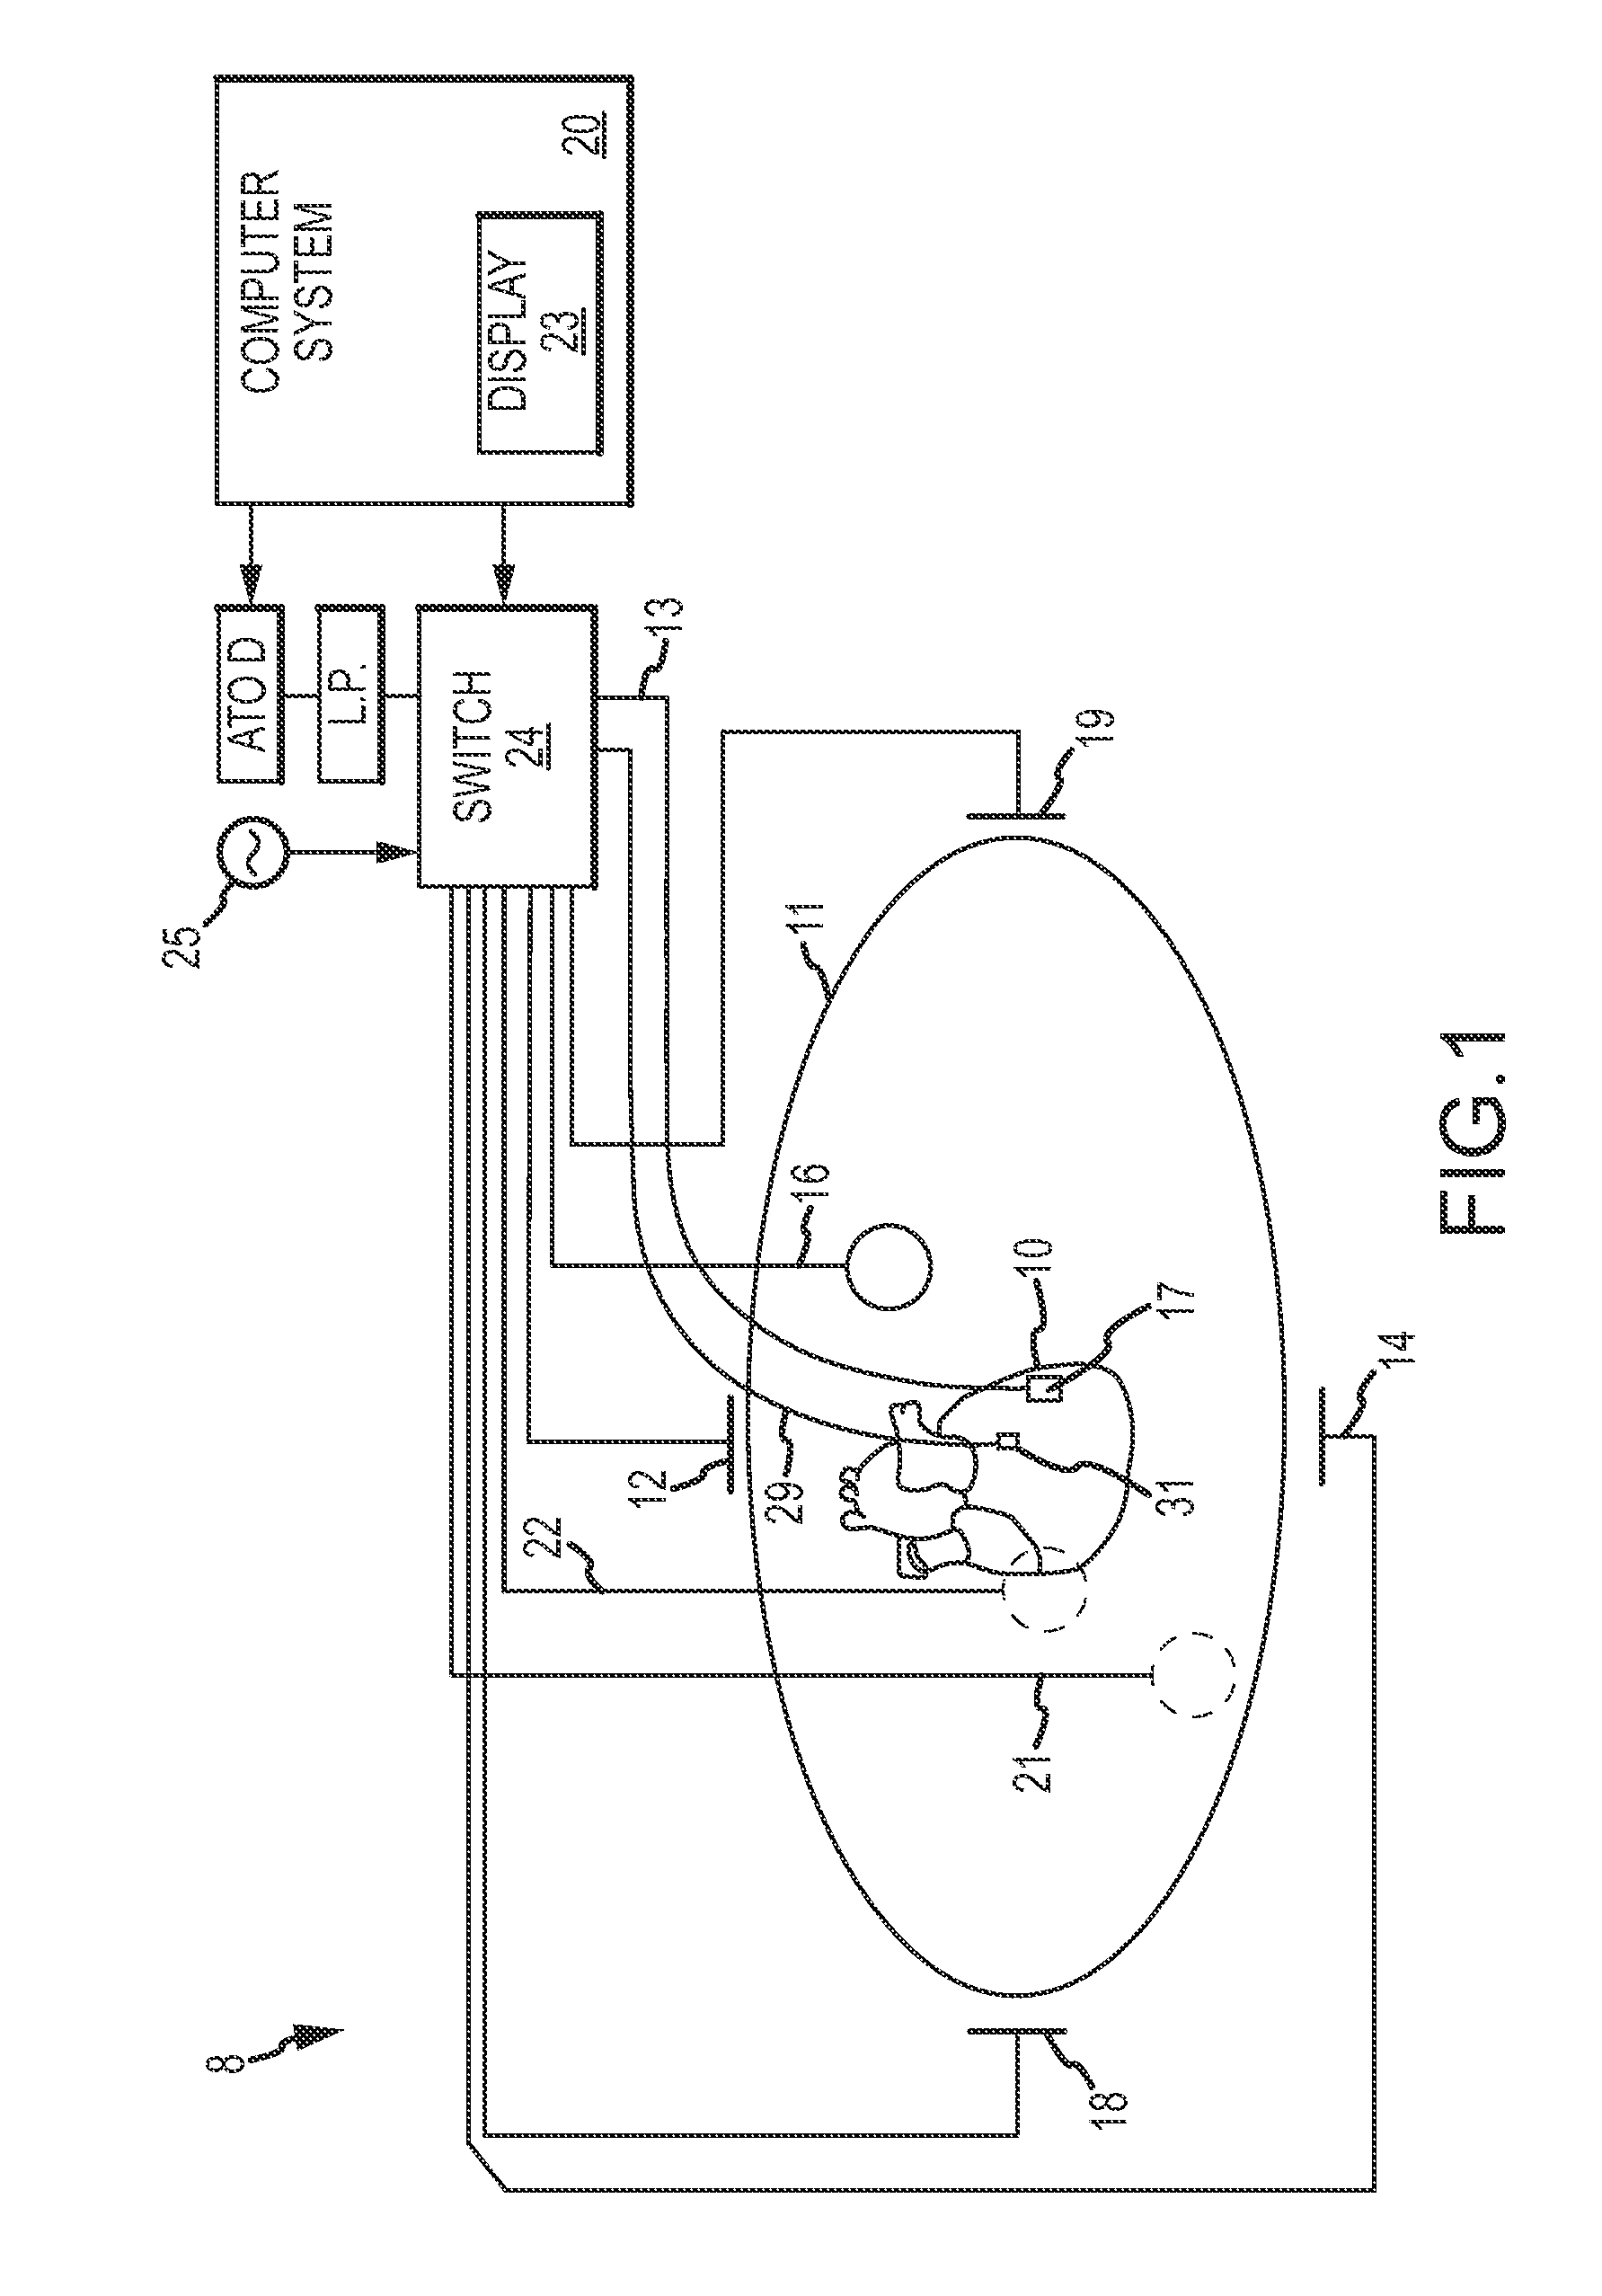 Methods and Apparatus for Detecting and Mapping Tissue Interfaces